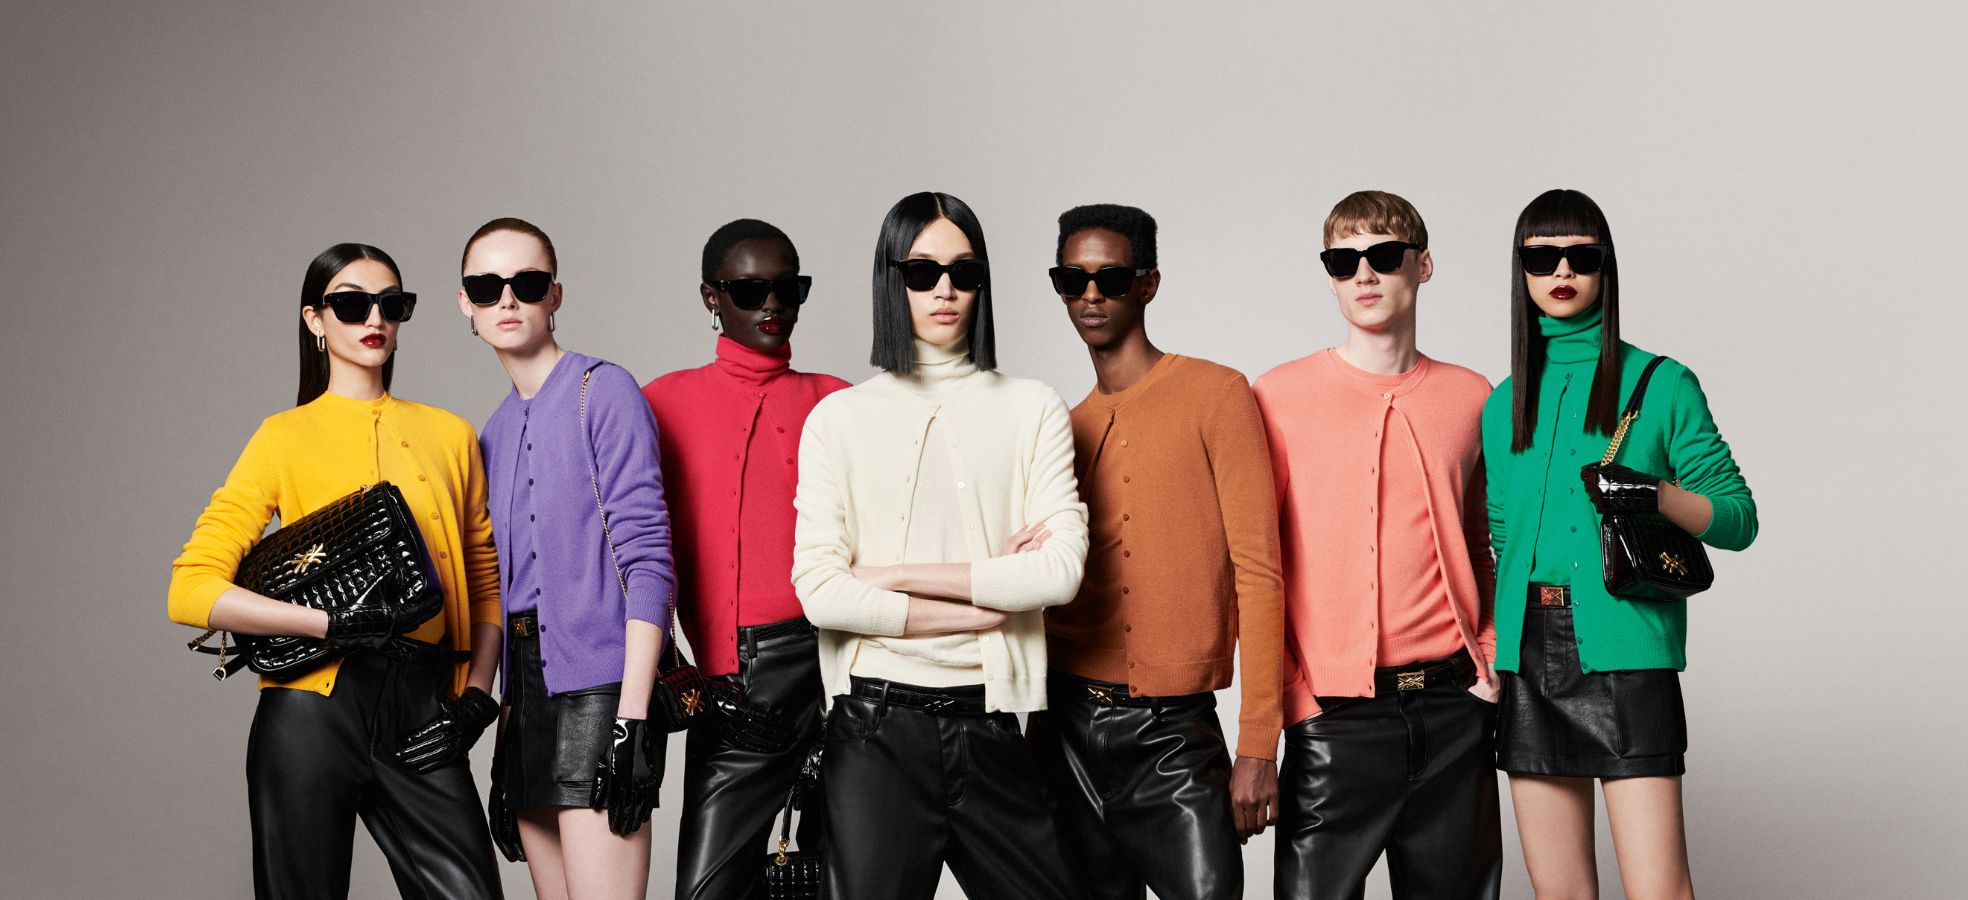 United Colors of Benetton 1968 x 900px - Lifestyle Image.jpg